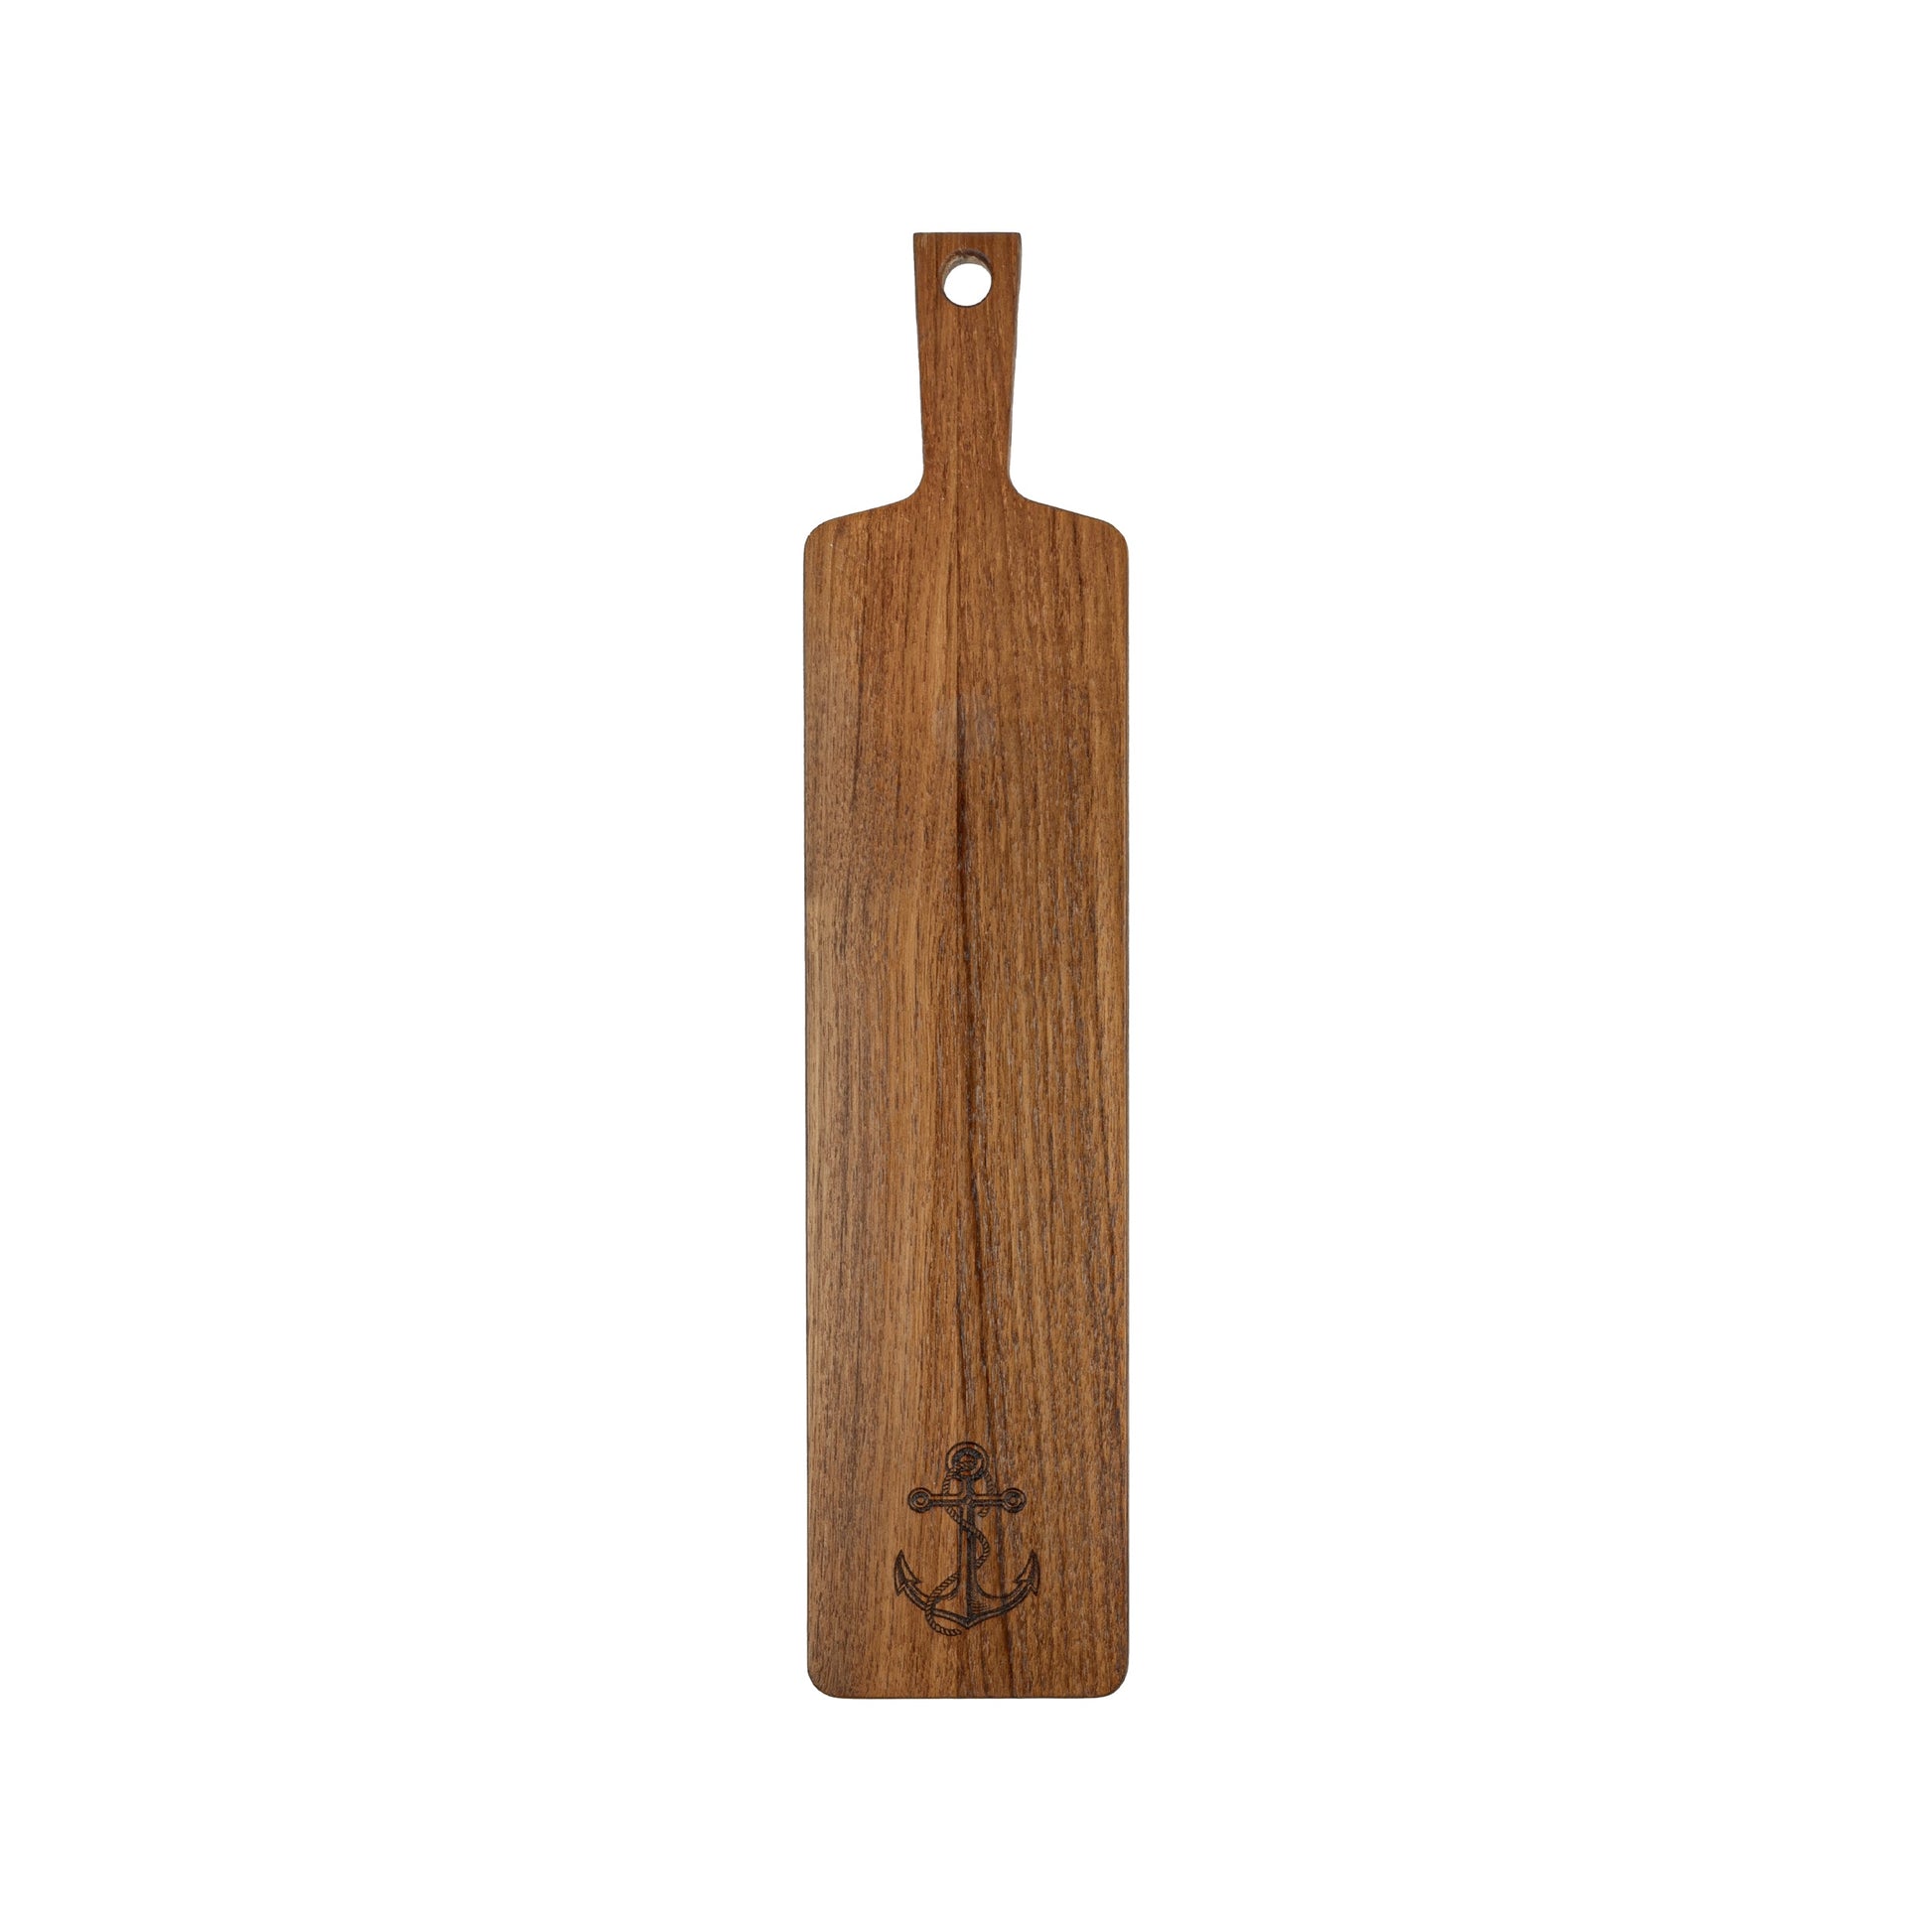 Teak Appetizer Serving Board-Serving Board-Nautical Decor and Gifts